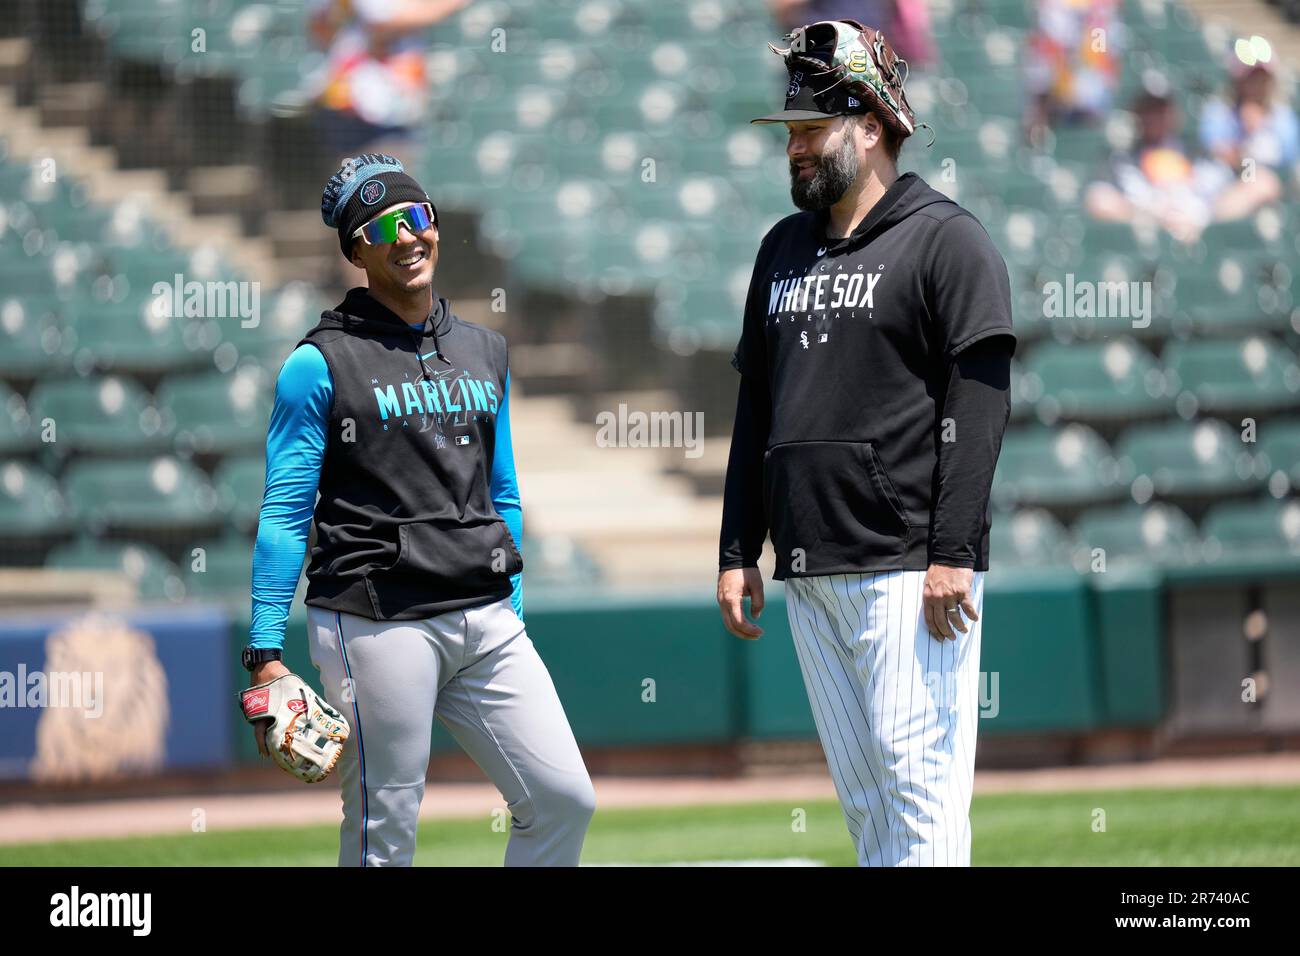 Miami Marlins first base coach Jon Jay, left, and Chicago White